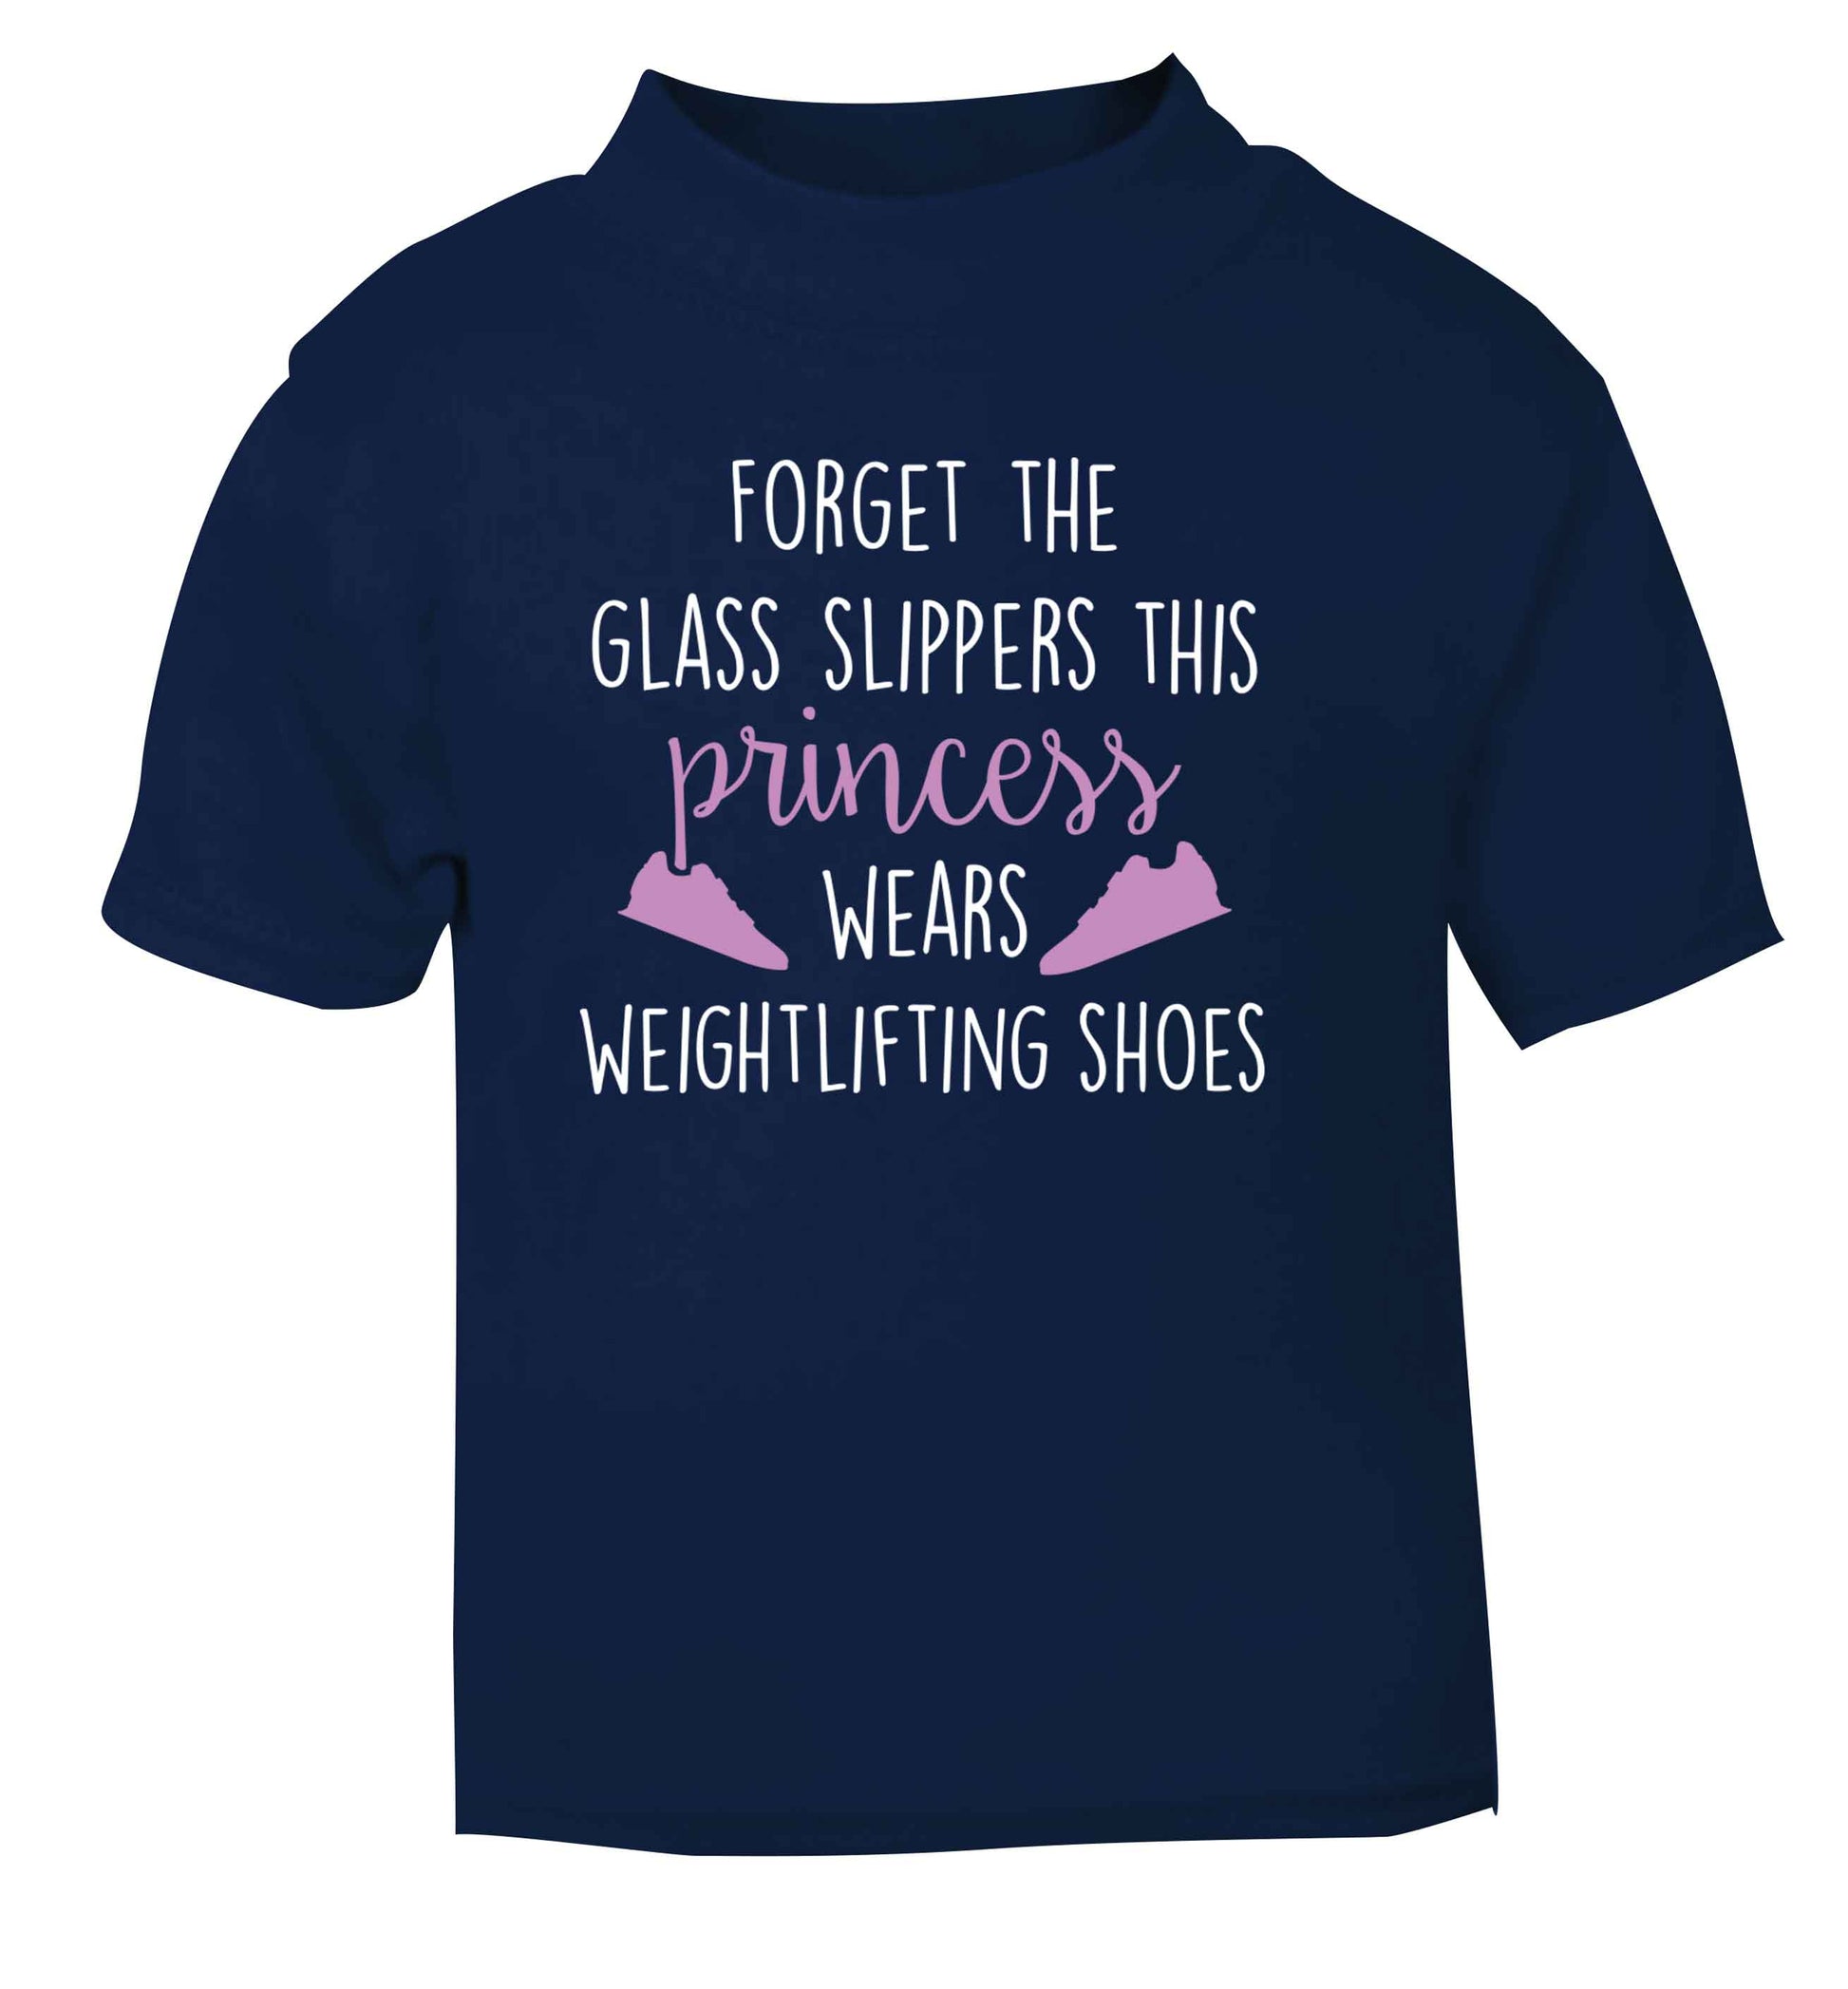 Forget the glass slippers this princess wears weightlifting shoes navy Baby Toddler Tshirt 2 Years